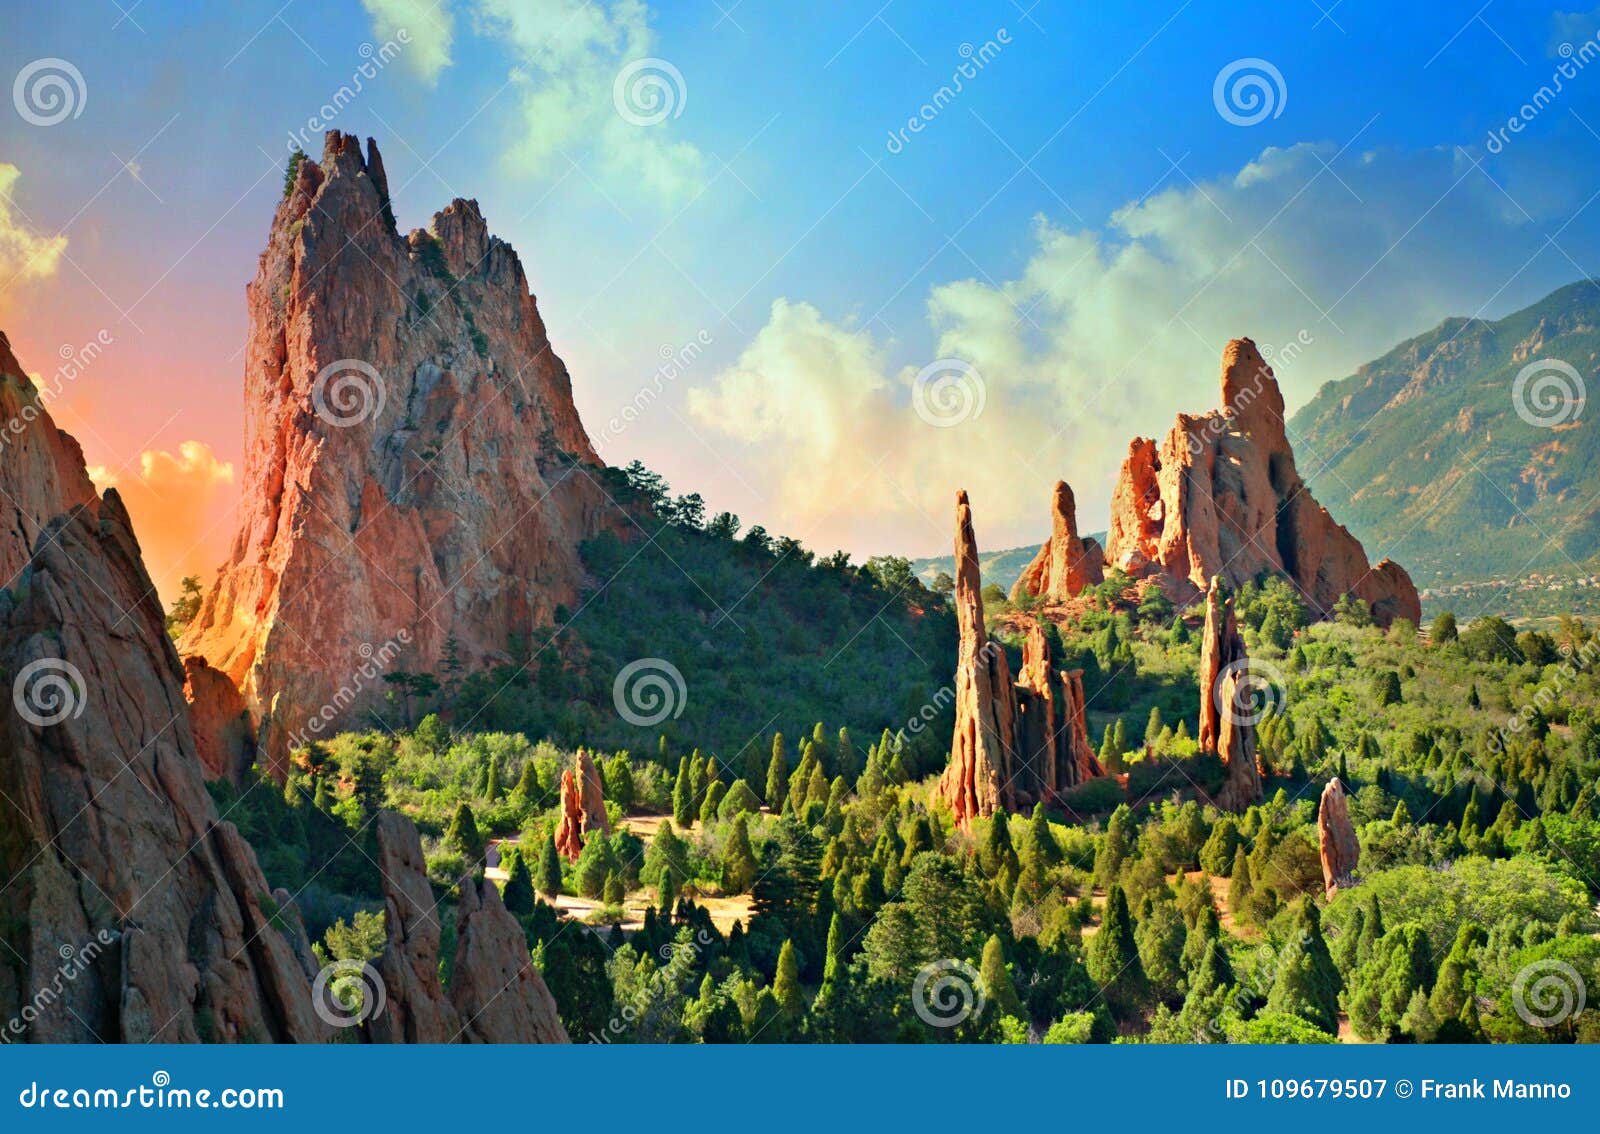 Rock Formations At Sunrise Garden Of The Gods Stock Image Image